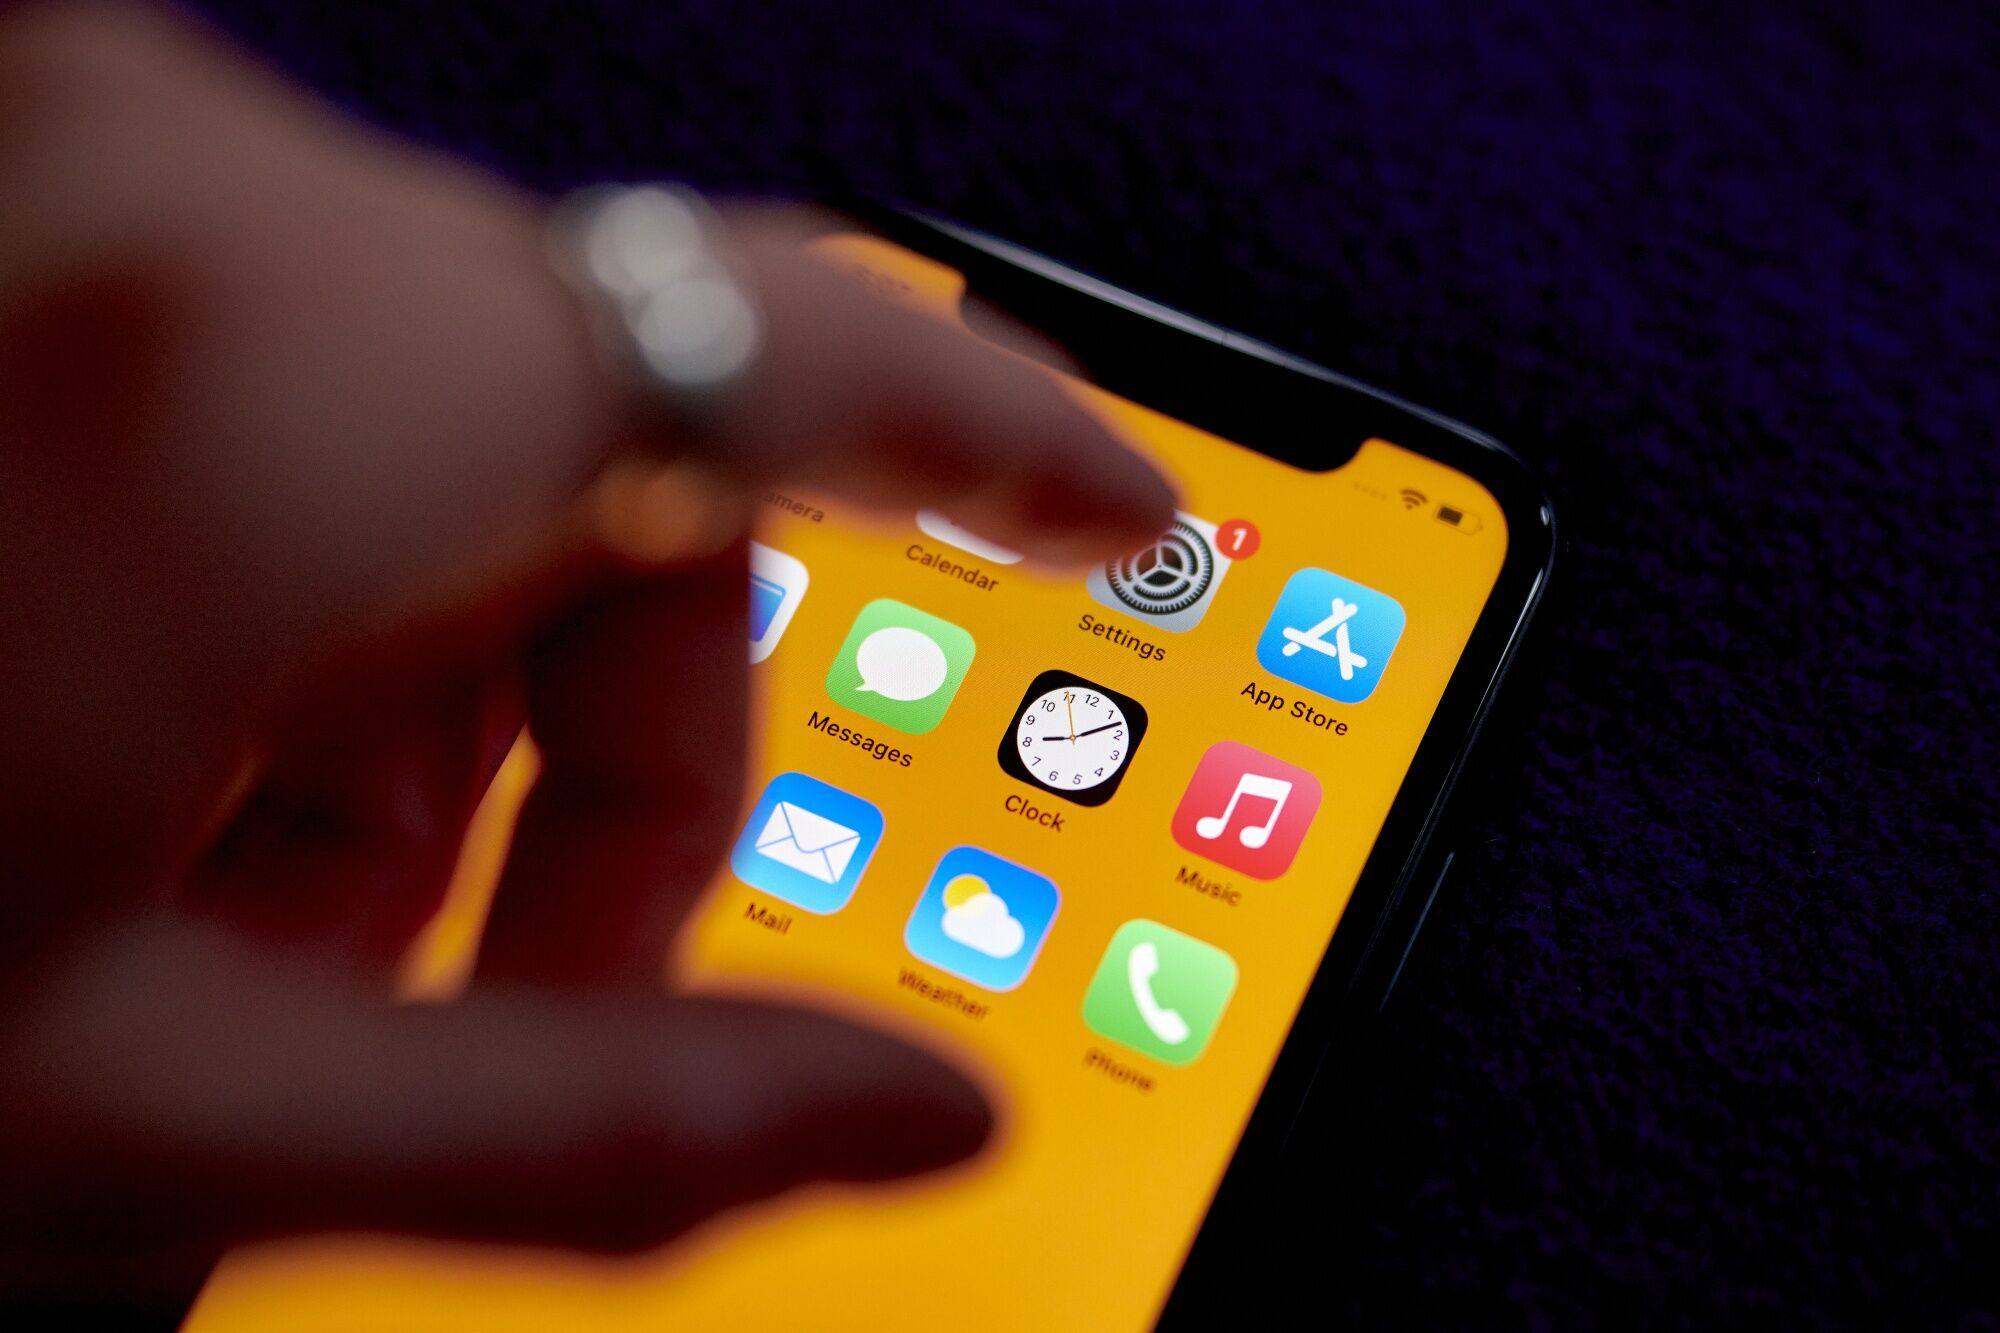 Apple’s App Store is not among the first batch of 26 app distribution platforms that have registered under a new regulation in China, although most of its major rivals made the list. Photo: Bloomberg